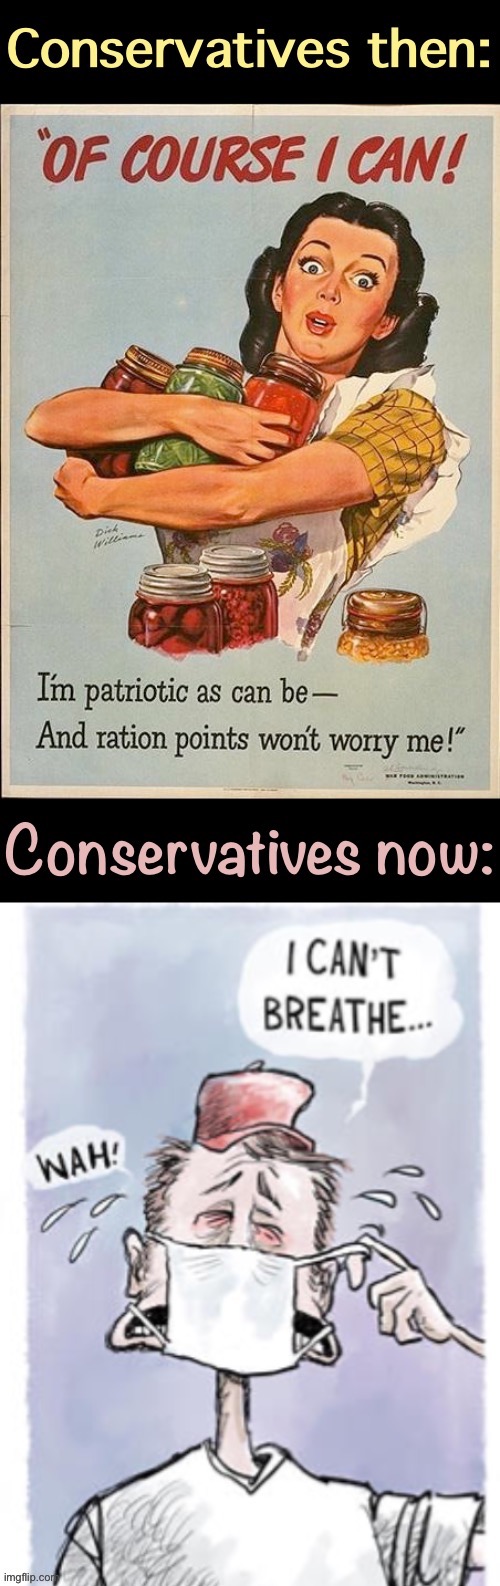 Sacrifice is for chumps. | image tagged in conservatives then conservatives now,sacrifice,is,for,chumps,maga | made w/ Imgflip meme maker